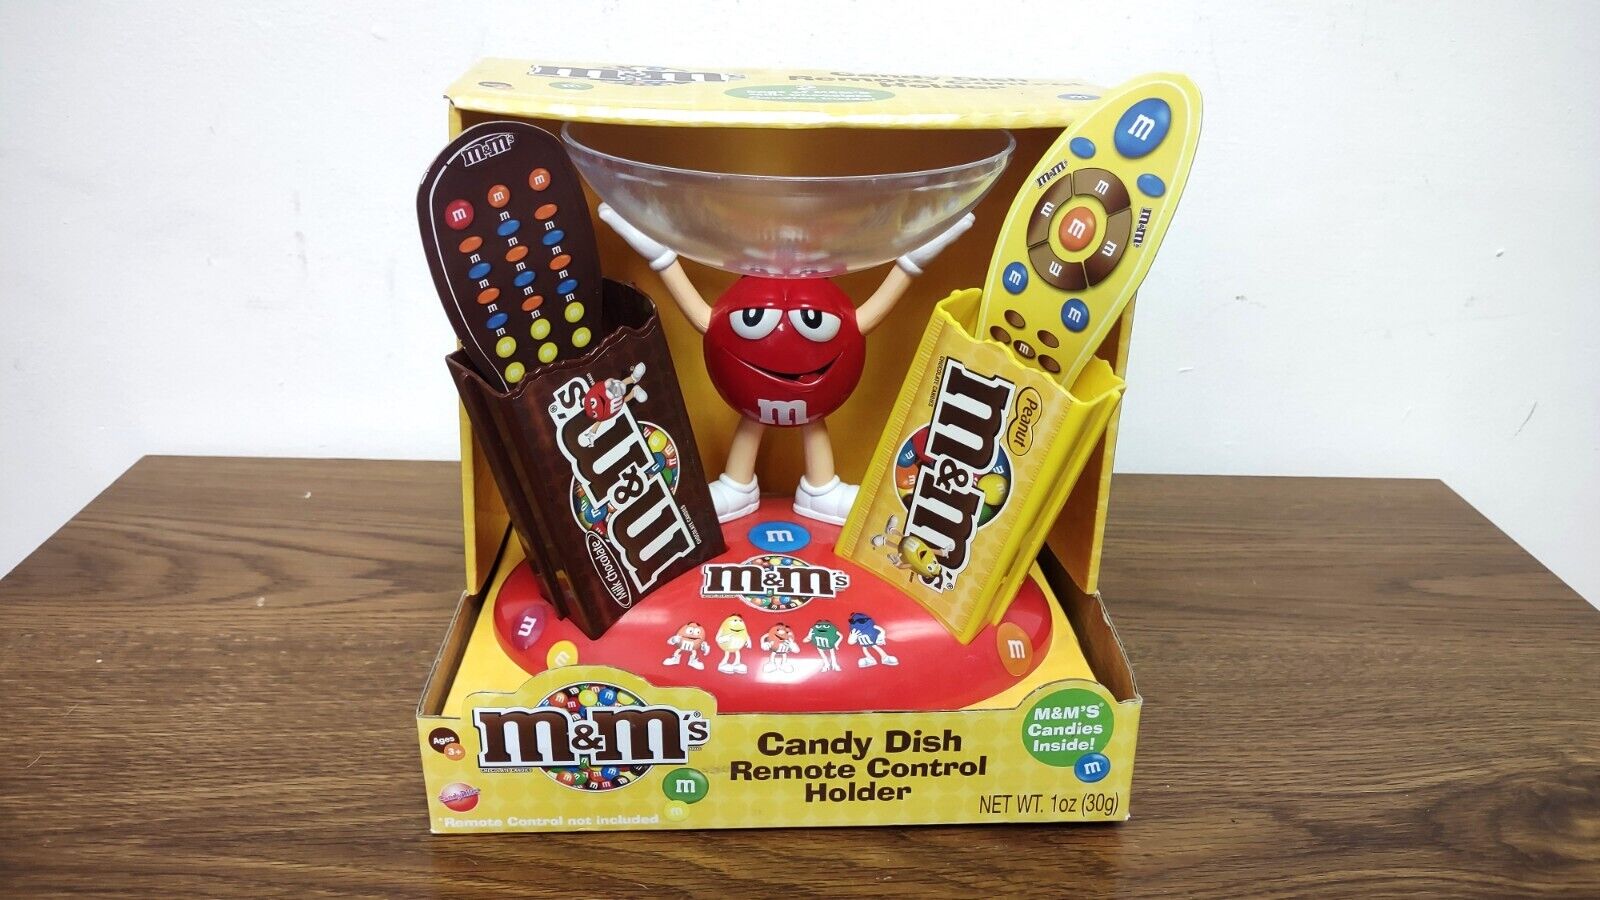 2010 M&Ms Red Candy Dish & Remote Control Holder Collectible Open Box (No Candy)